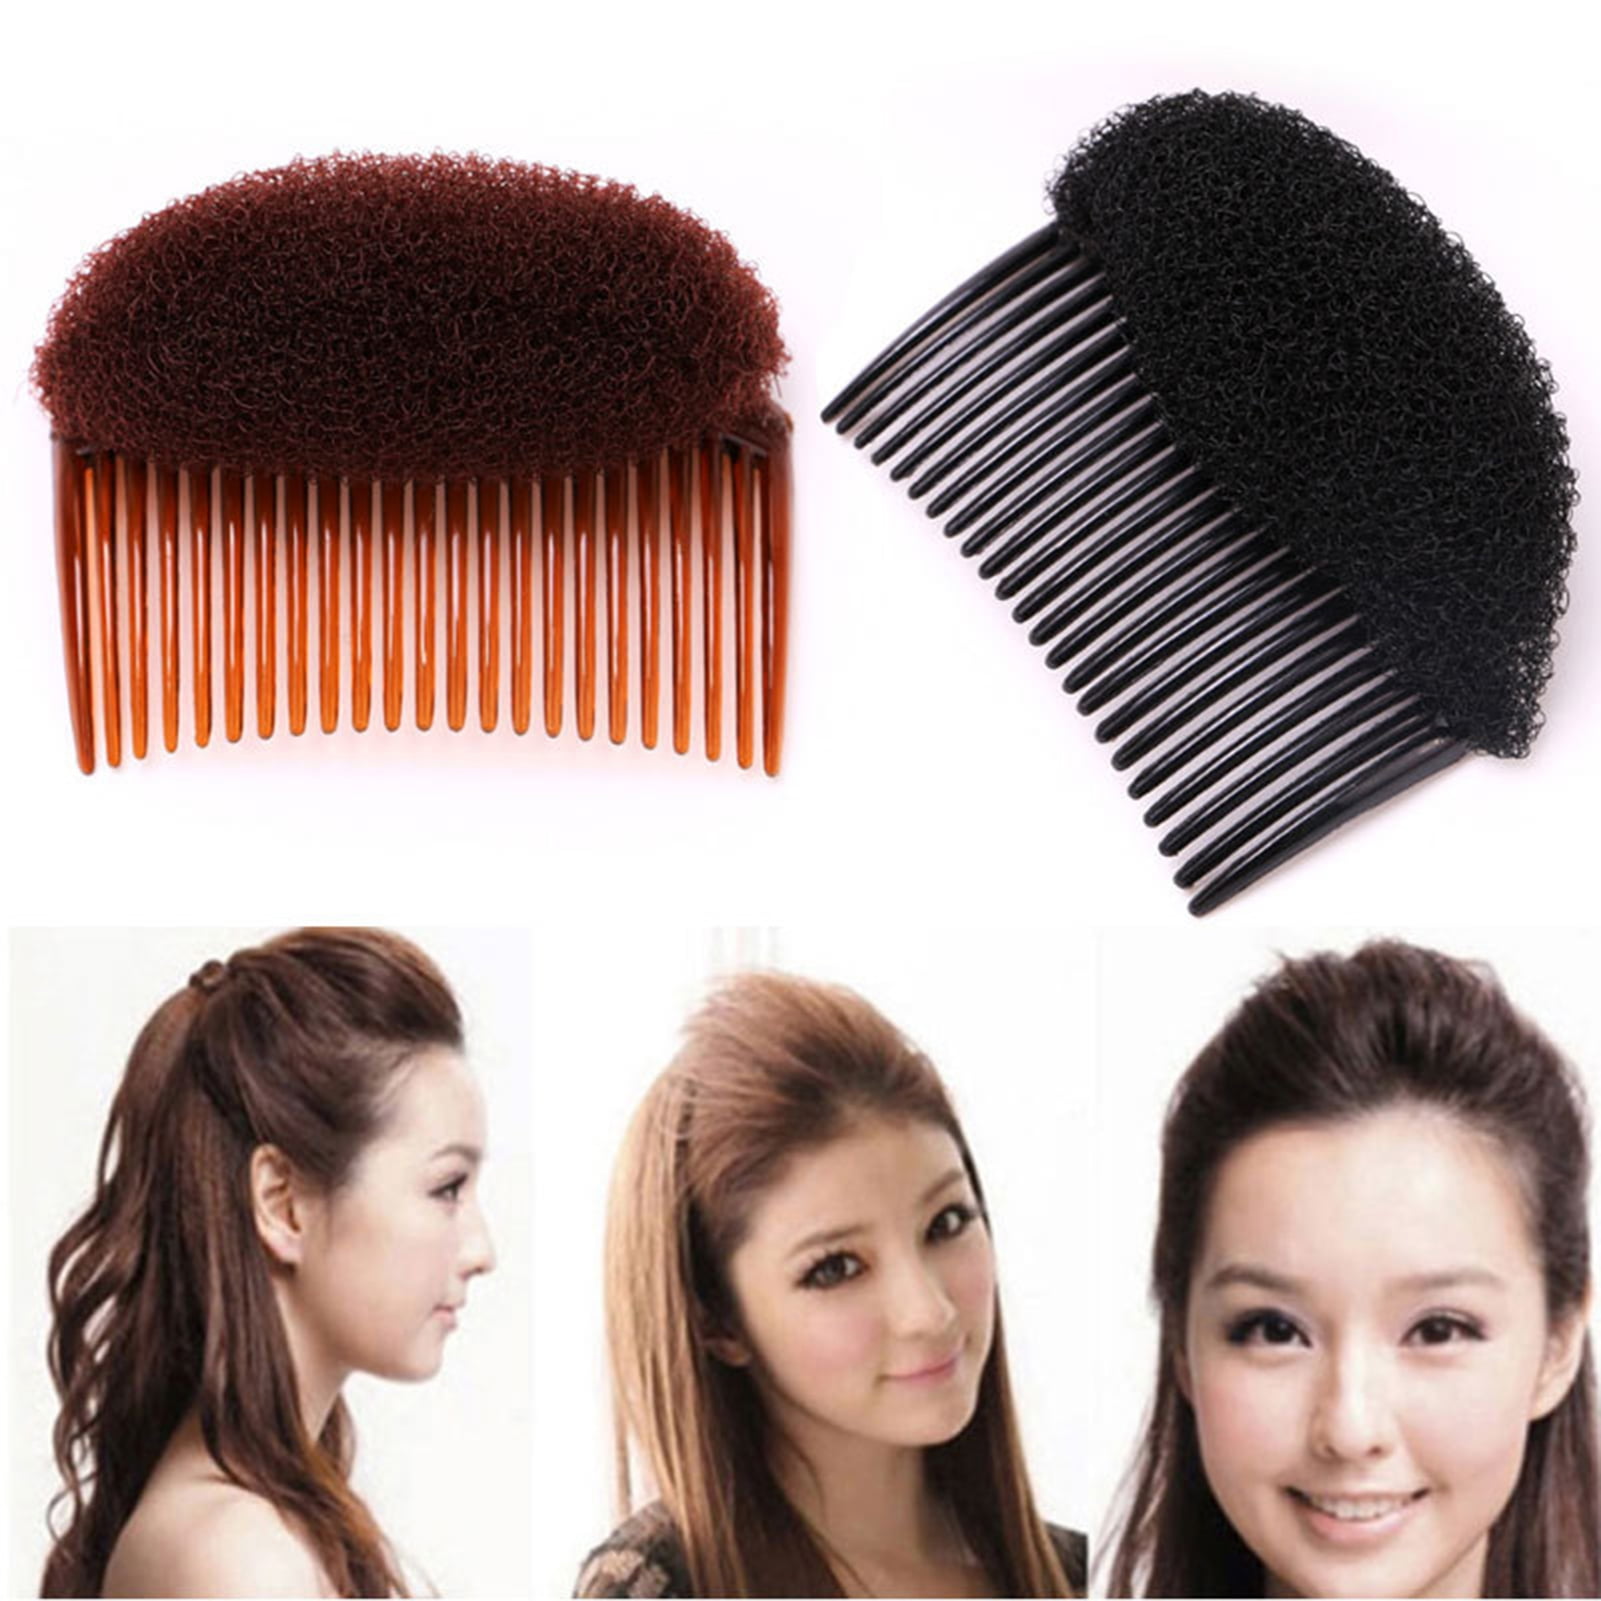 Cherryhome Hair Base Set Puff Hair Head Cushion Styling Insert Braid Tool  Invisible Fluffy Hair Pad Bump up Comb Clip Sponge Bun Fluffy Hairstyle  Tools Accessories for Women Girl 